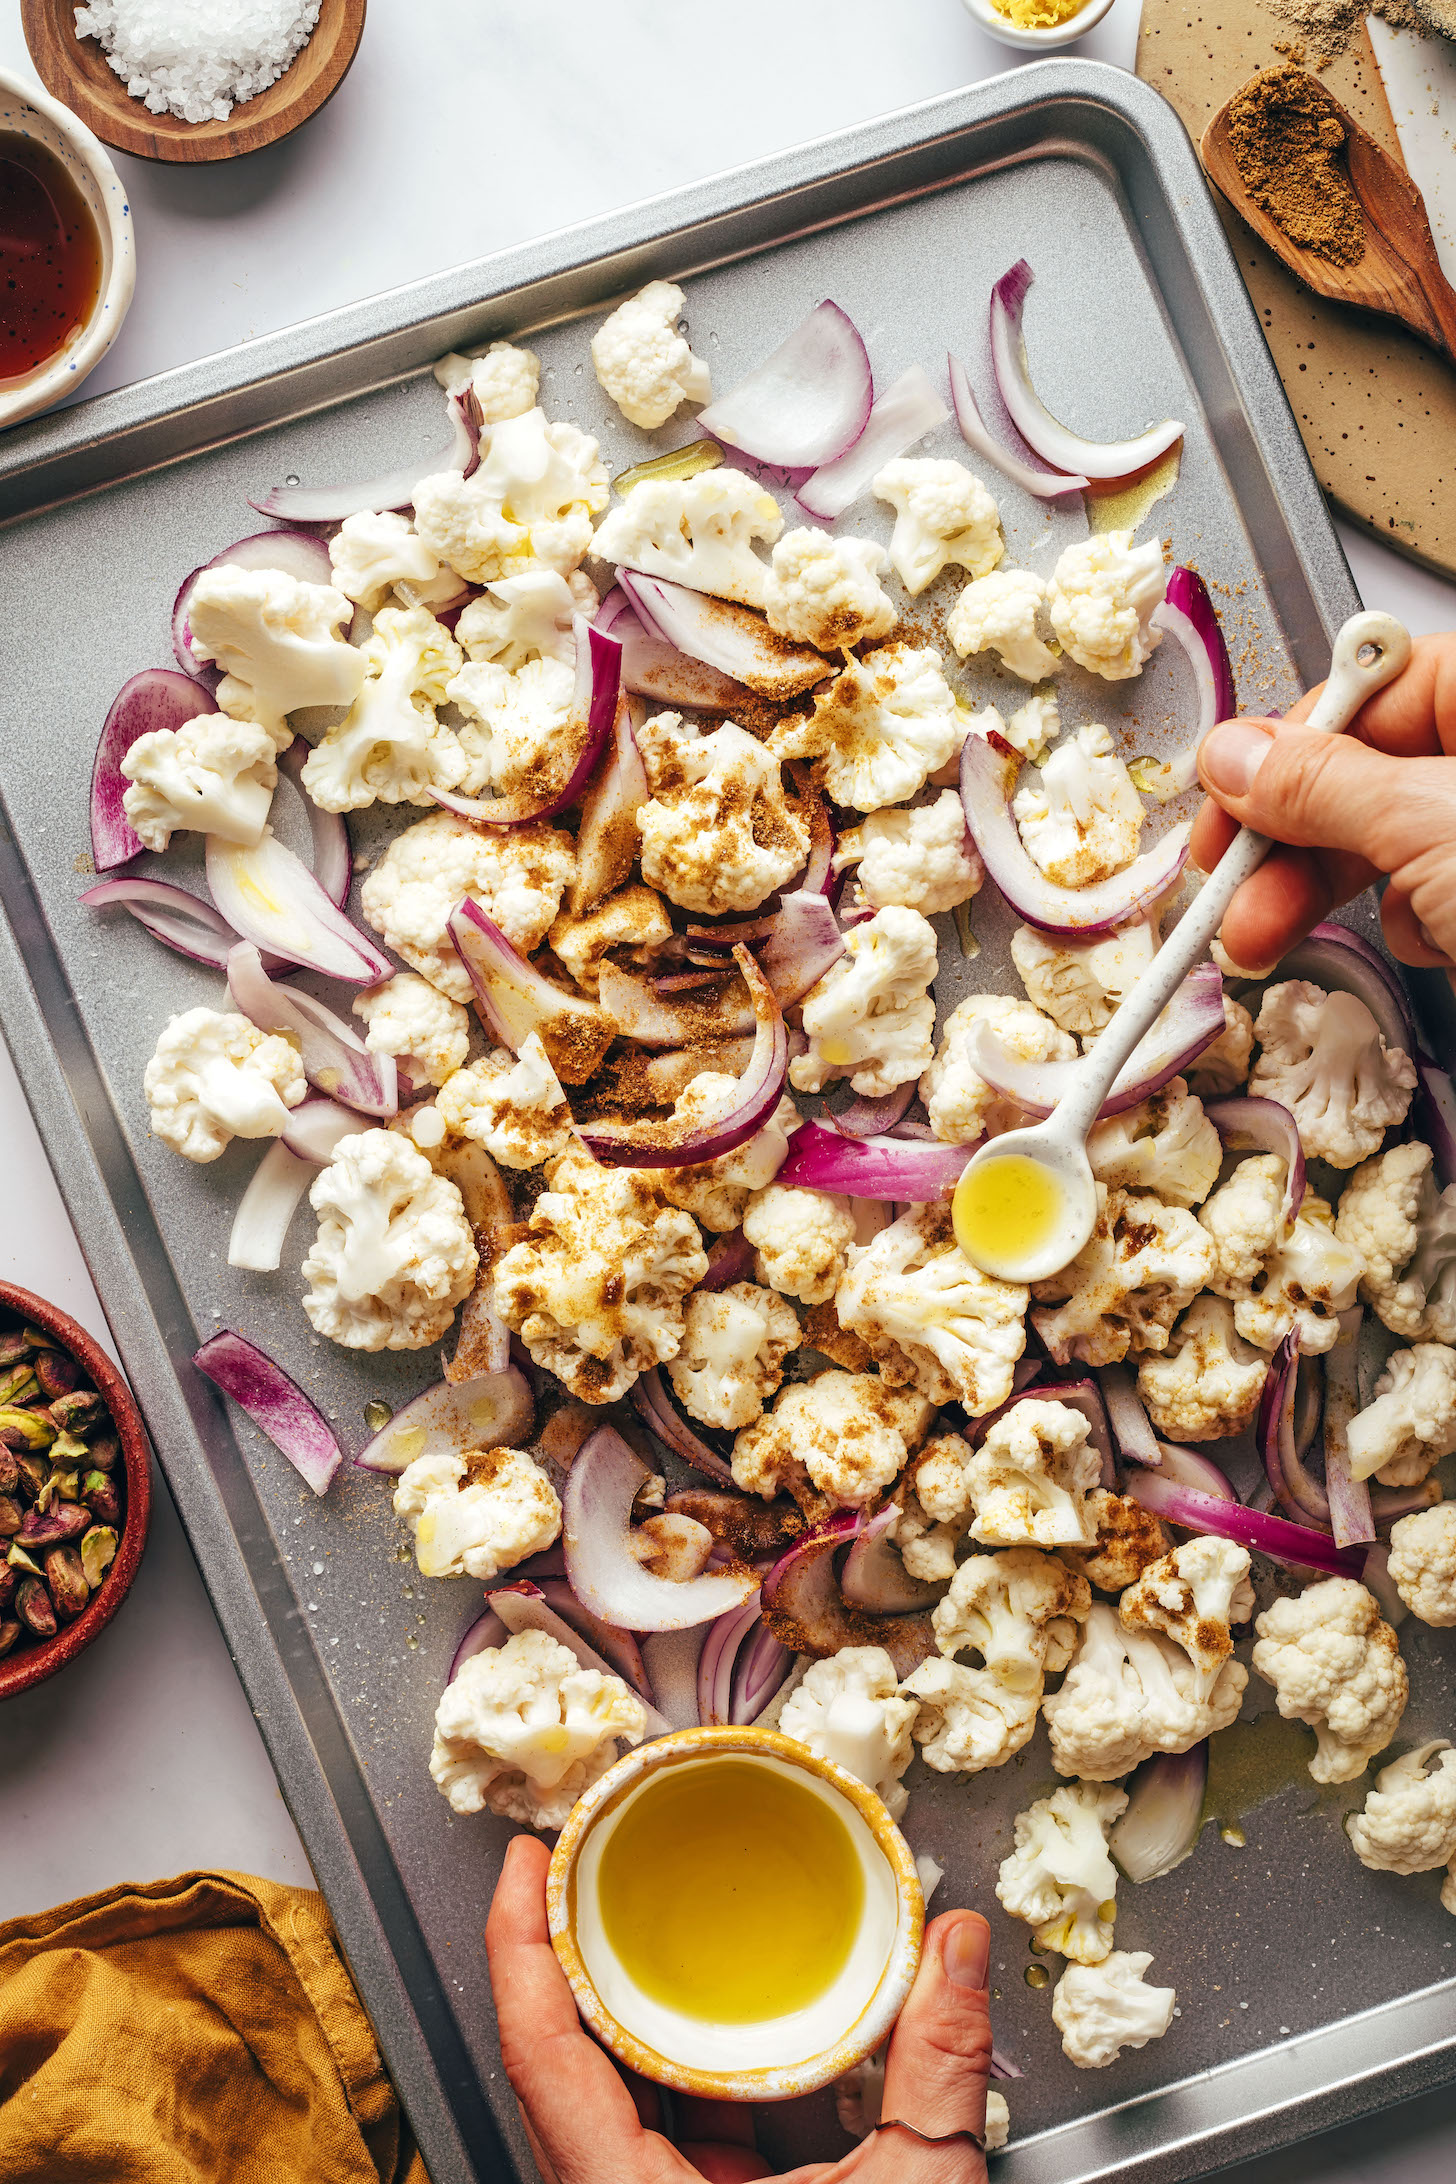 Add a spoonful of olive oil to a baking tray of cauliflower florets, red onion and herbs